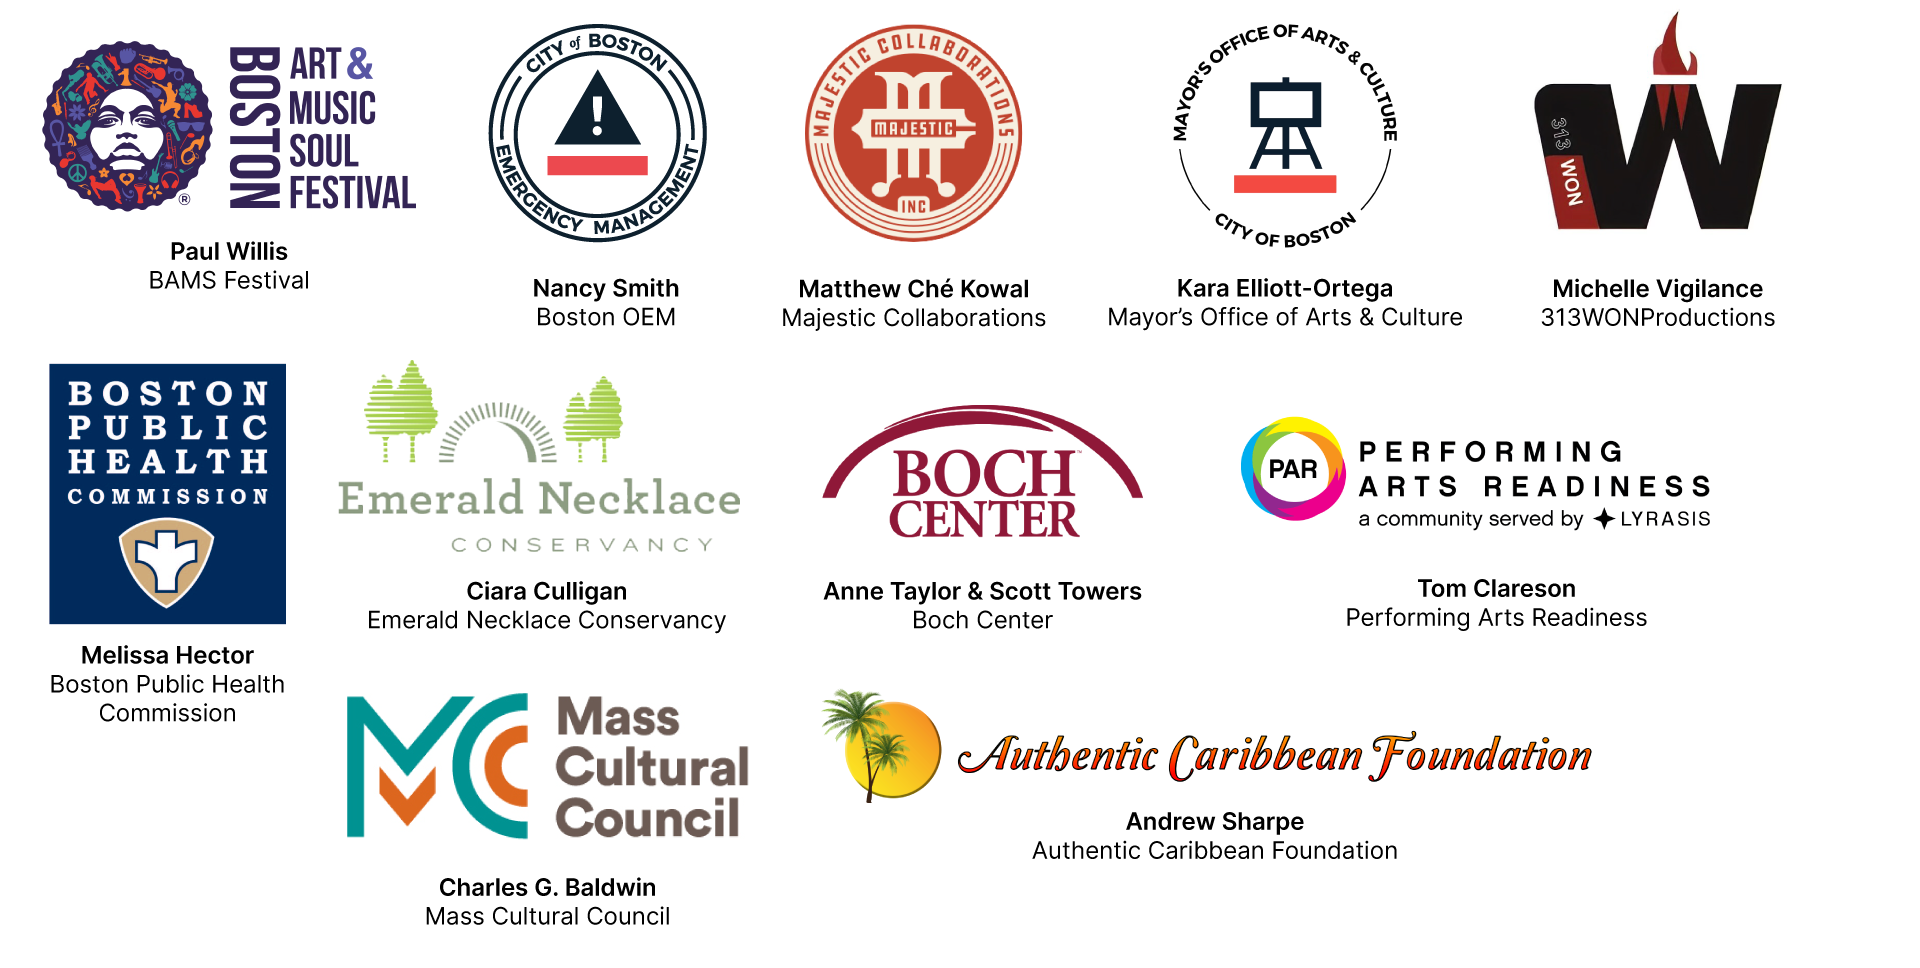 Logos and names of the event partners.